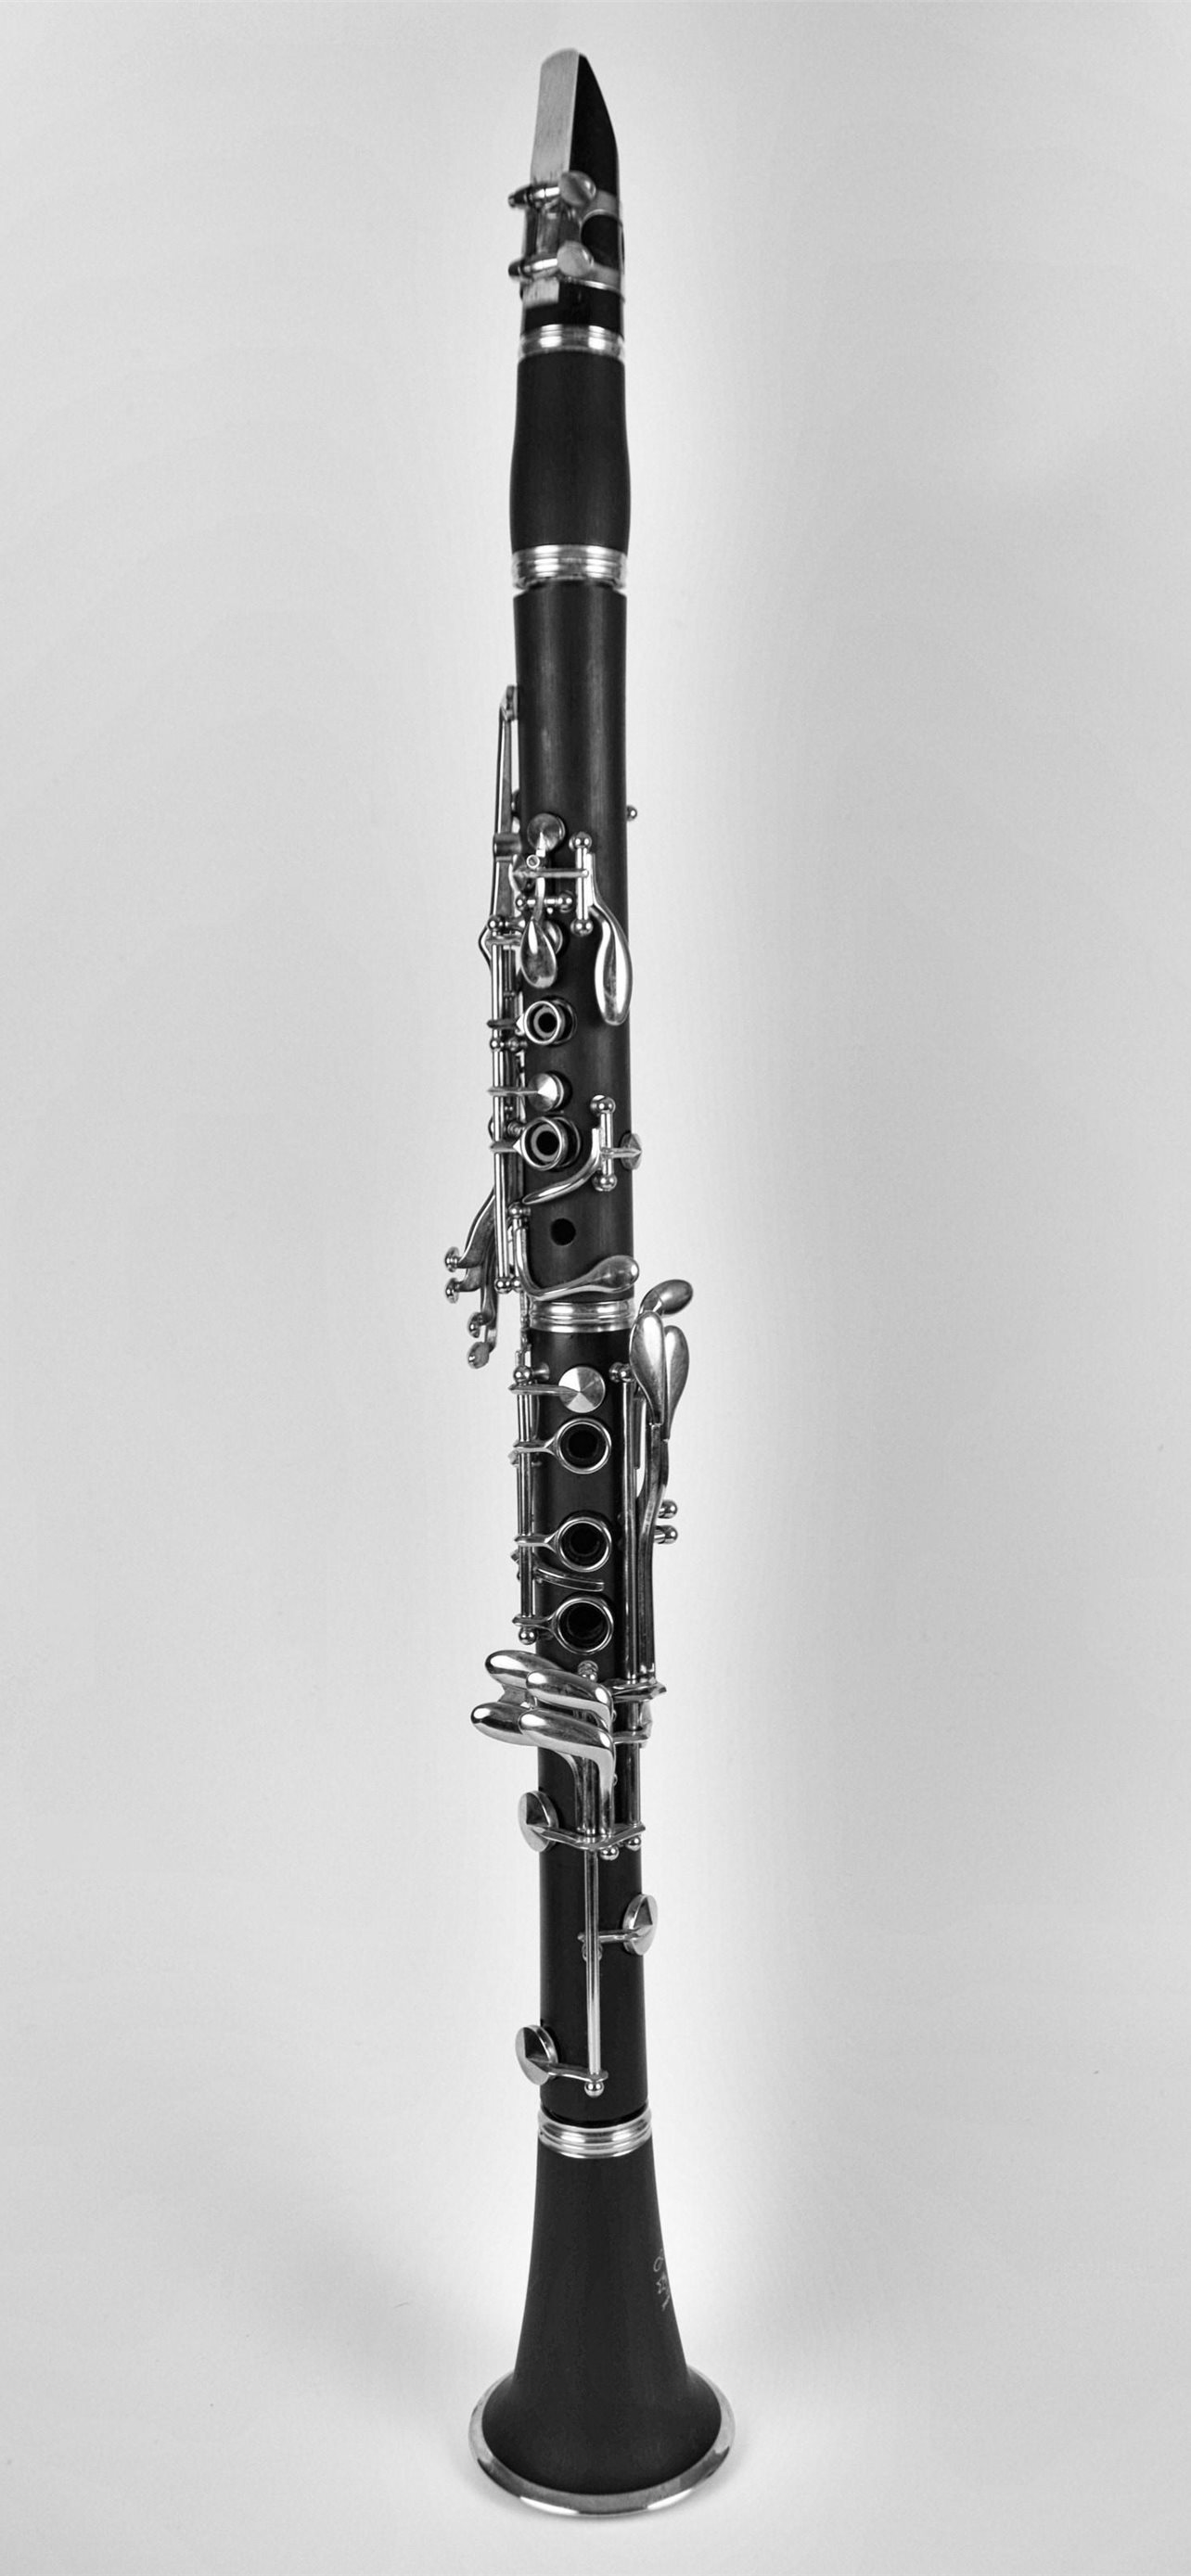 Clarinet Iphone Wallpapers Free Download